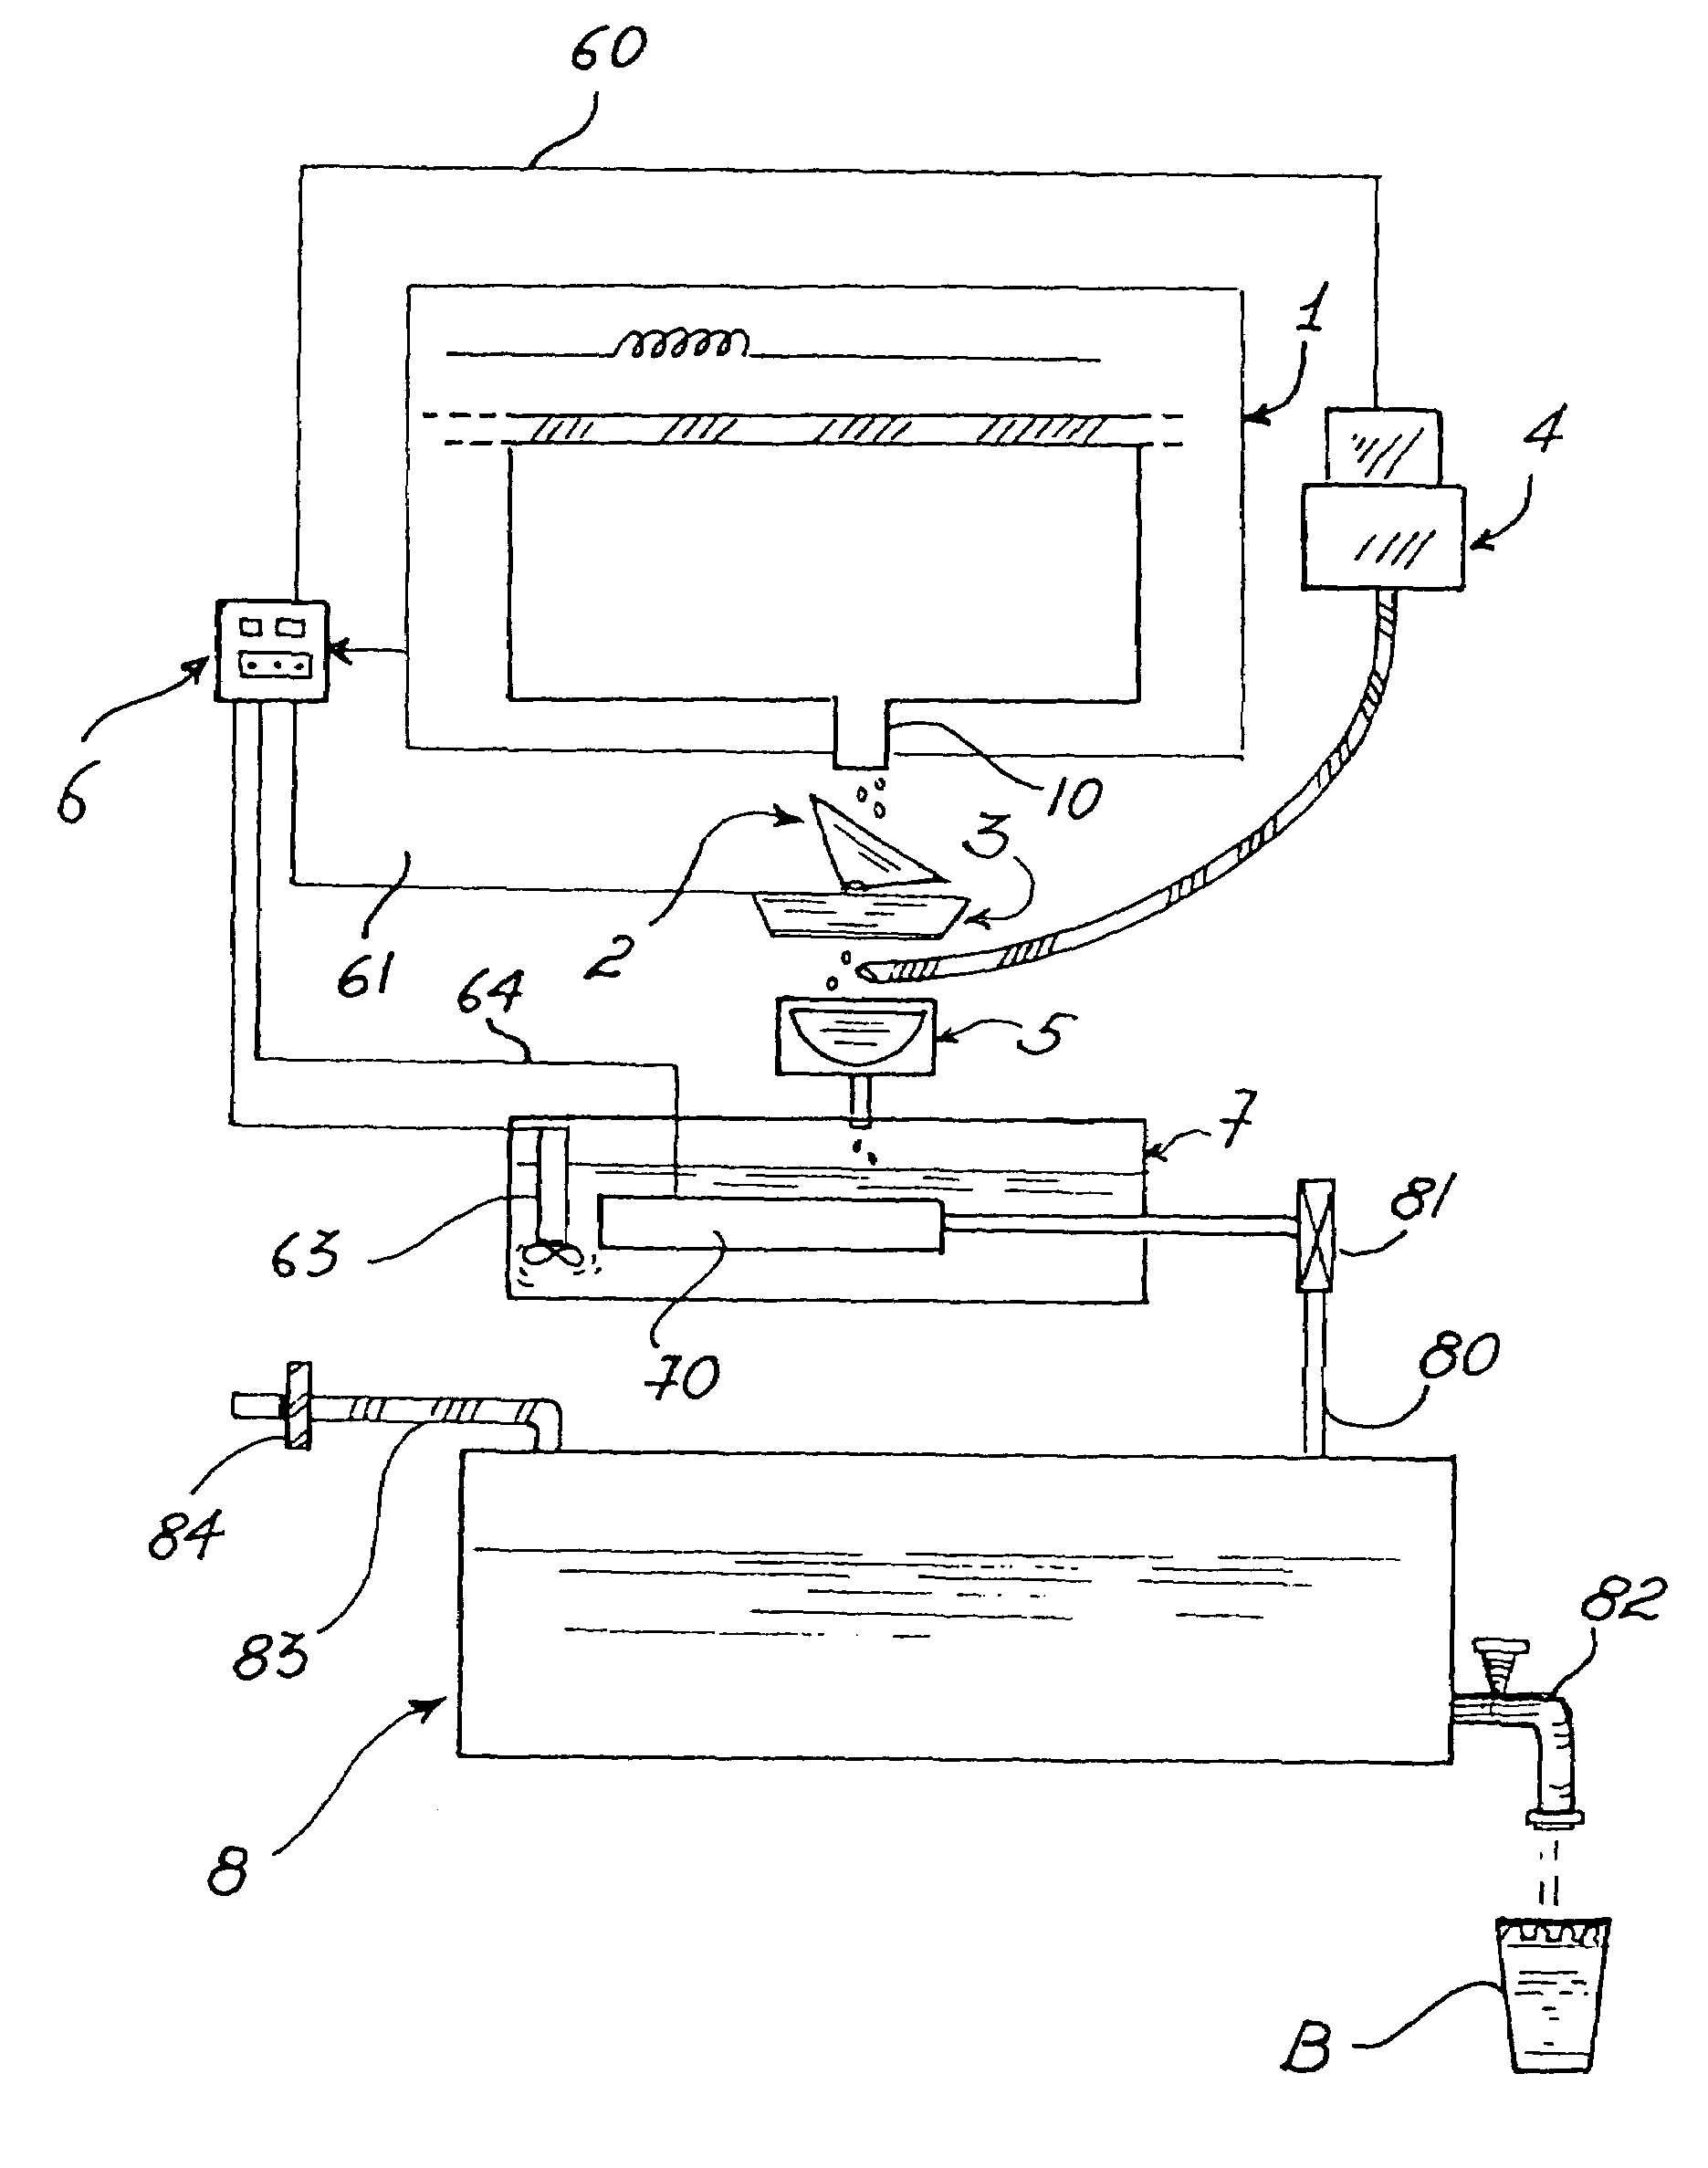 Device for conditioning water produced by air conditioning or environmental dehumidification apparatuses or plants